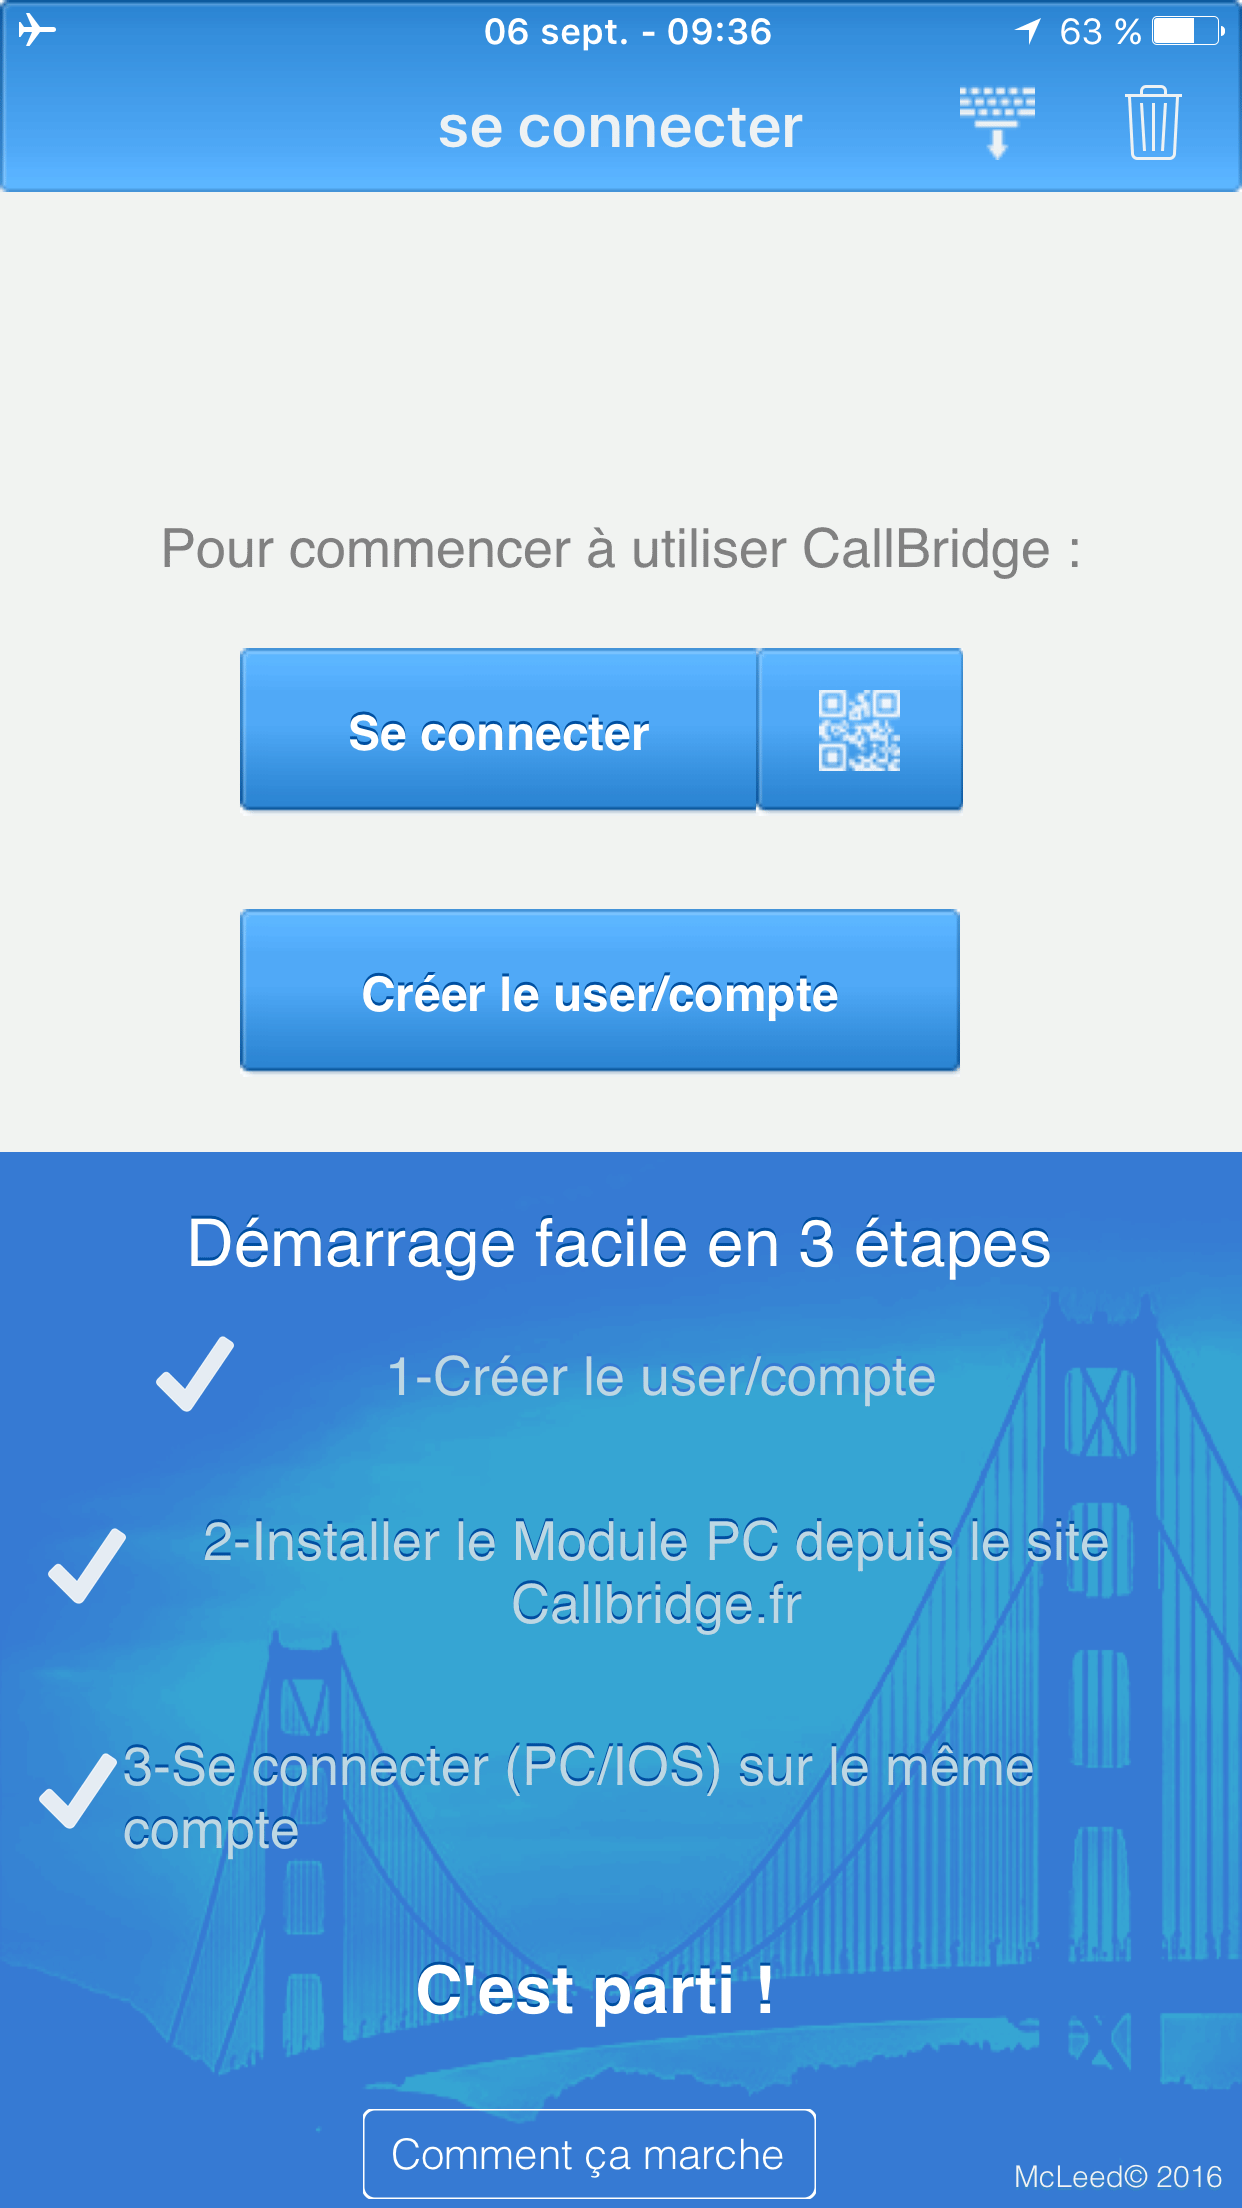 CallBridge Mobile - Ultra fast connection with the QR Code. You are functional in less than 5 minutes.